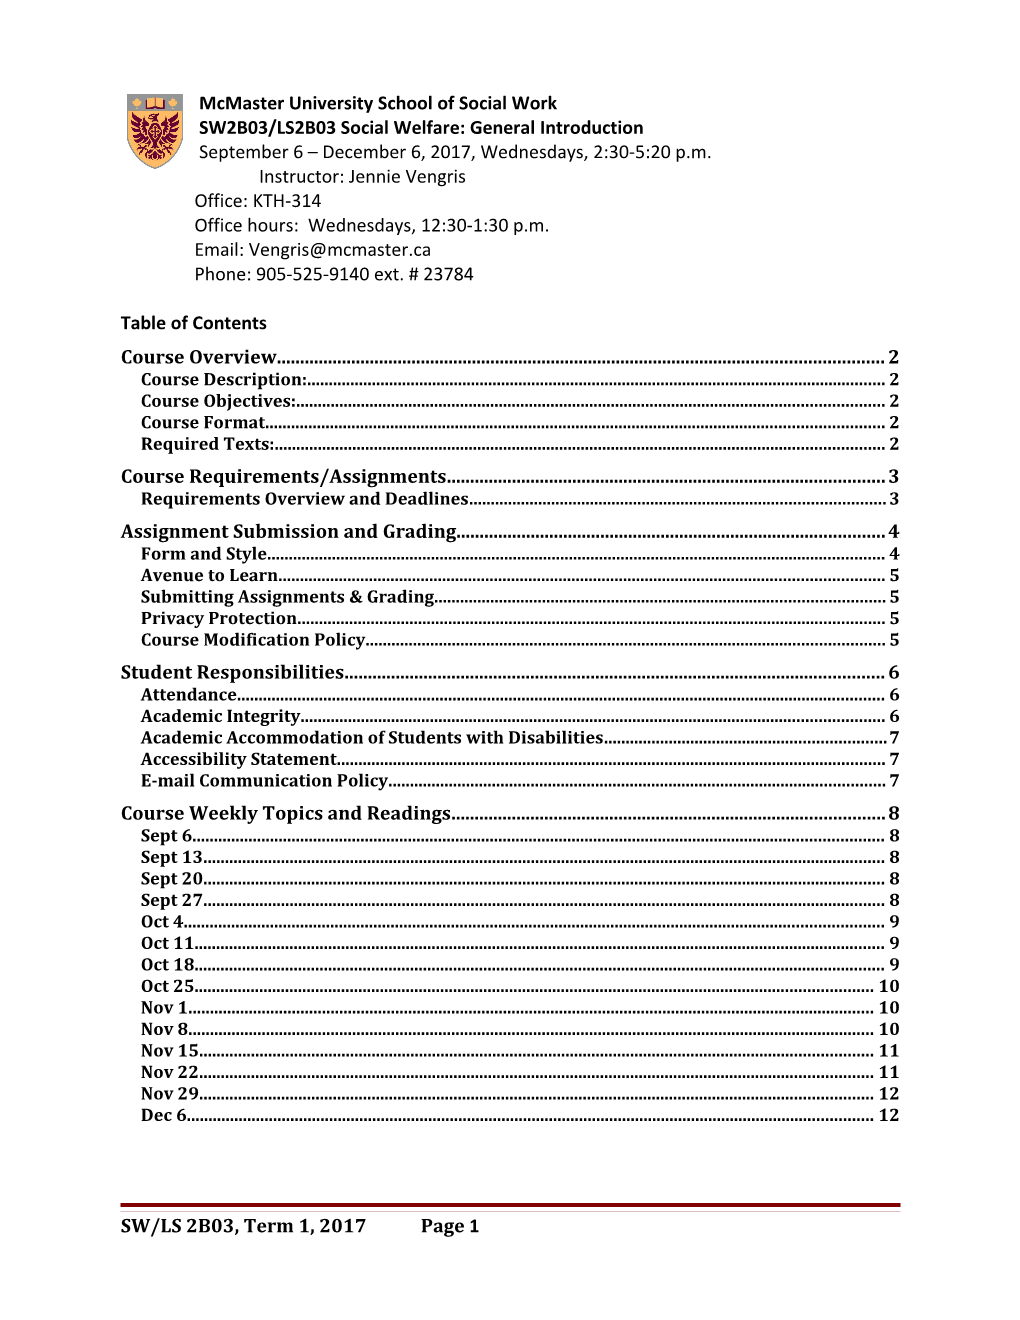 Accessible Course Outline Template s3